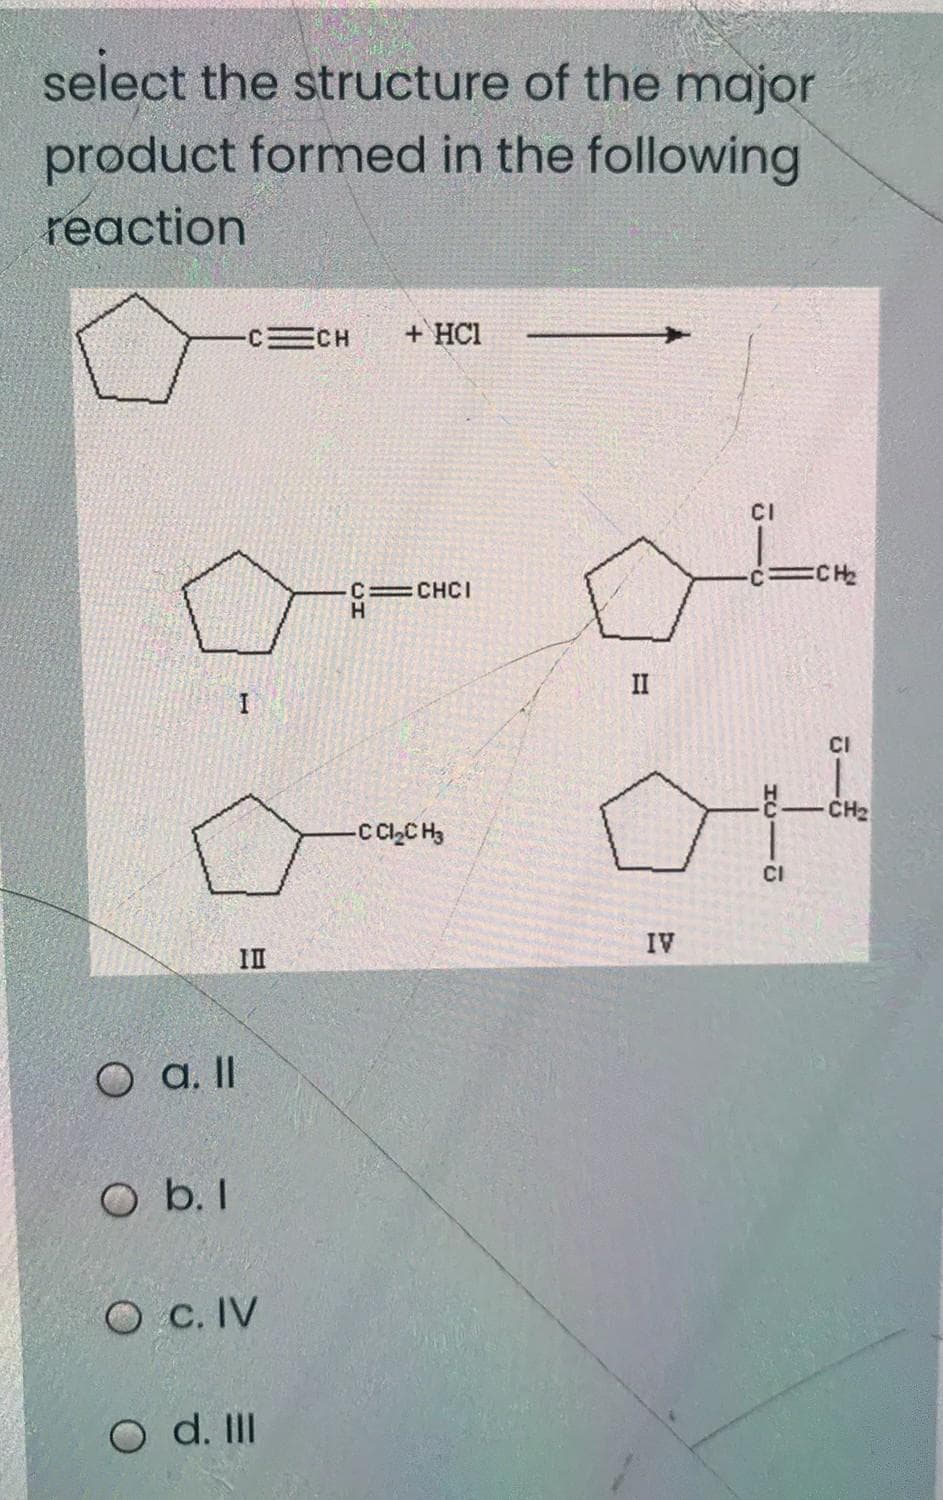 select the structure of the major
product formed in the following
reaction
CH
+ HC1
CI
ECH
C=CHCI
H.
II
CI
CH2
-C C,C H3
CI
IV
II
O a. I
O b. I
O c. IV
O d. II
